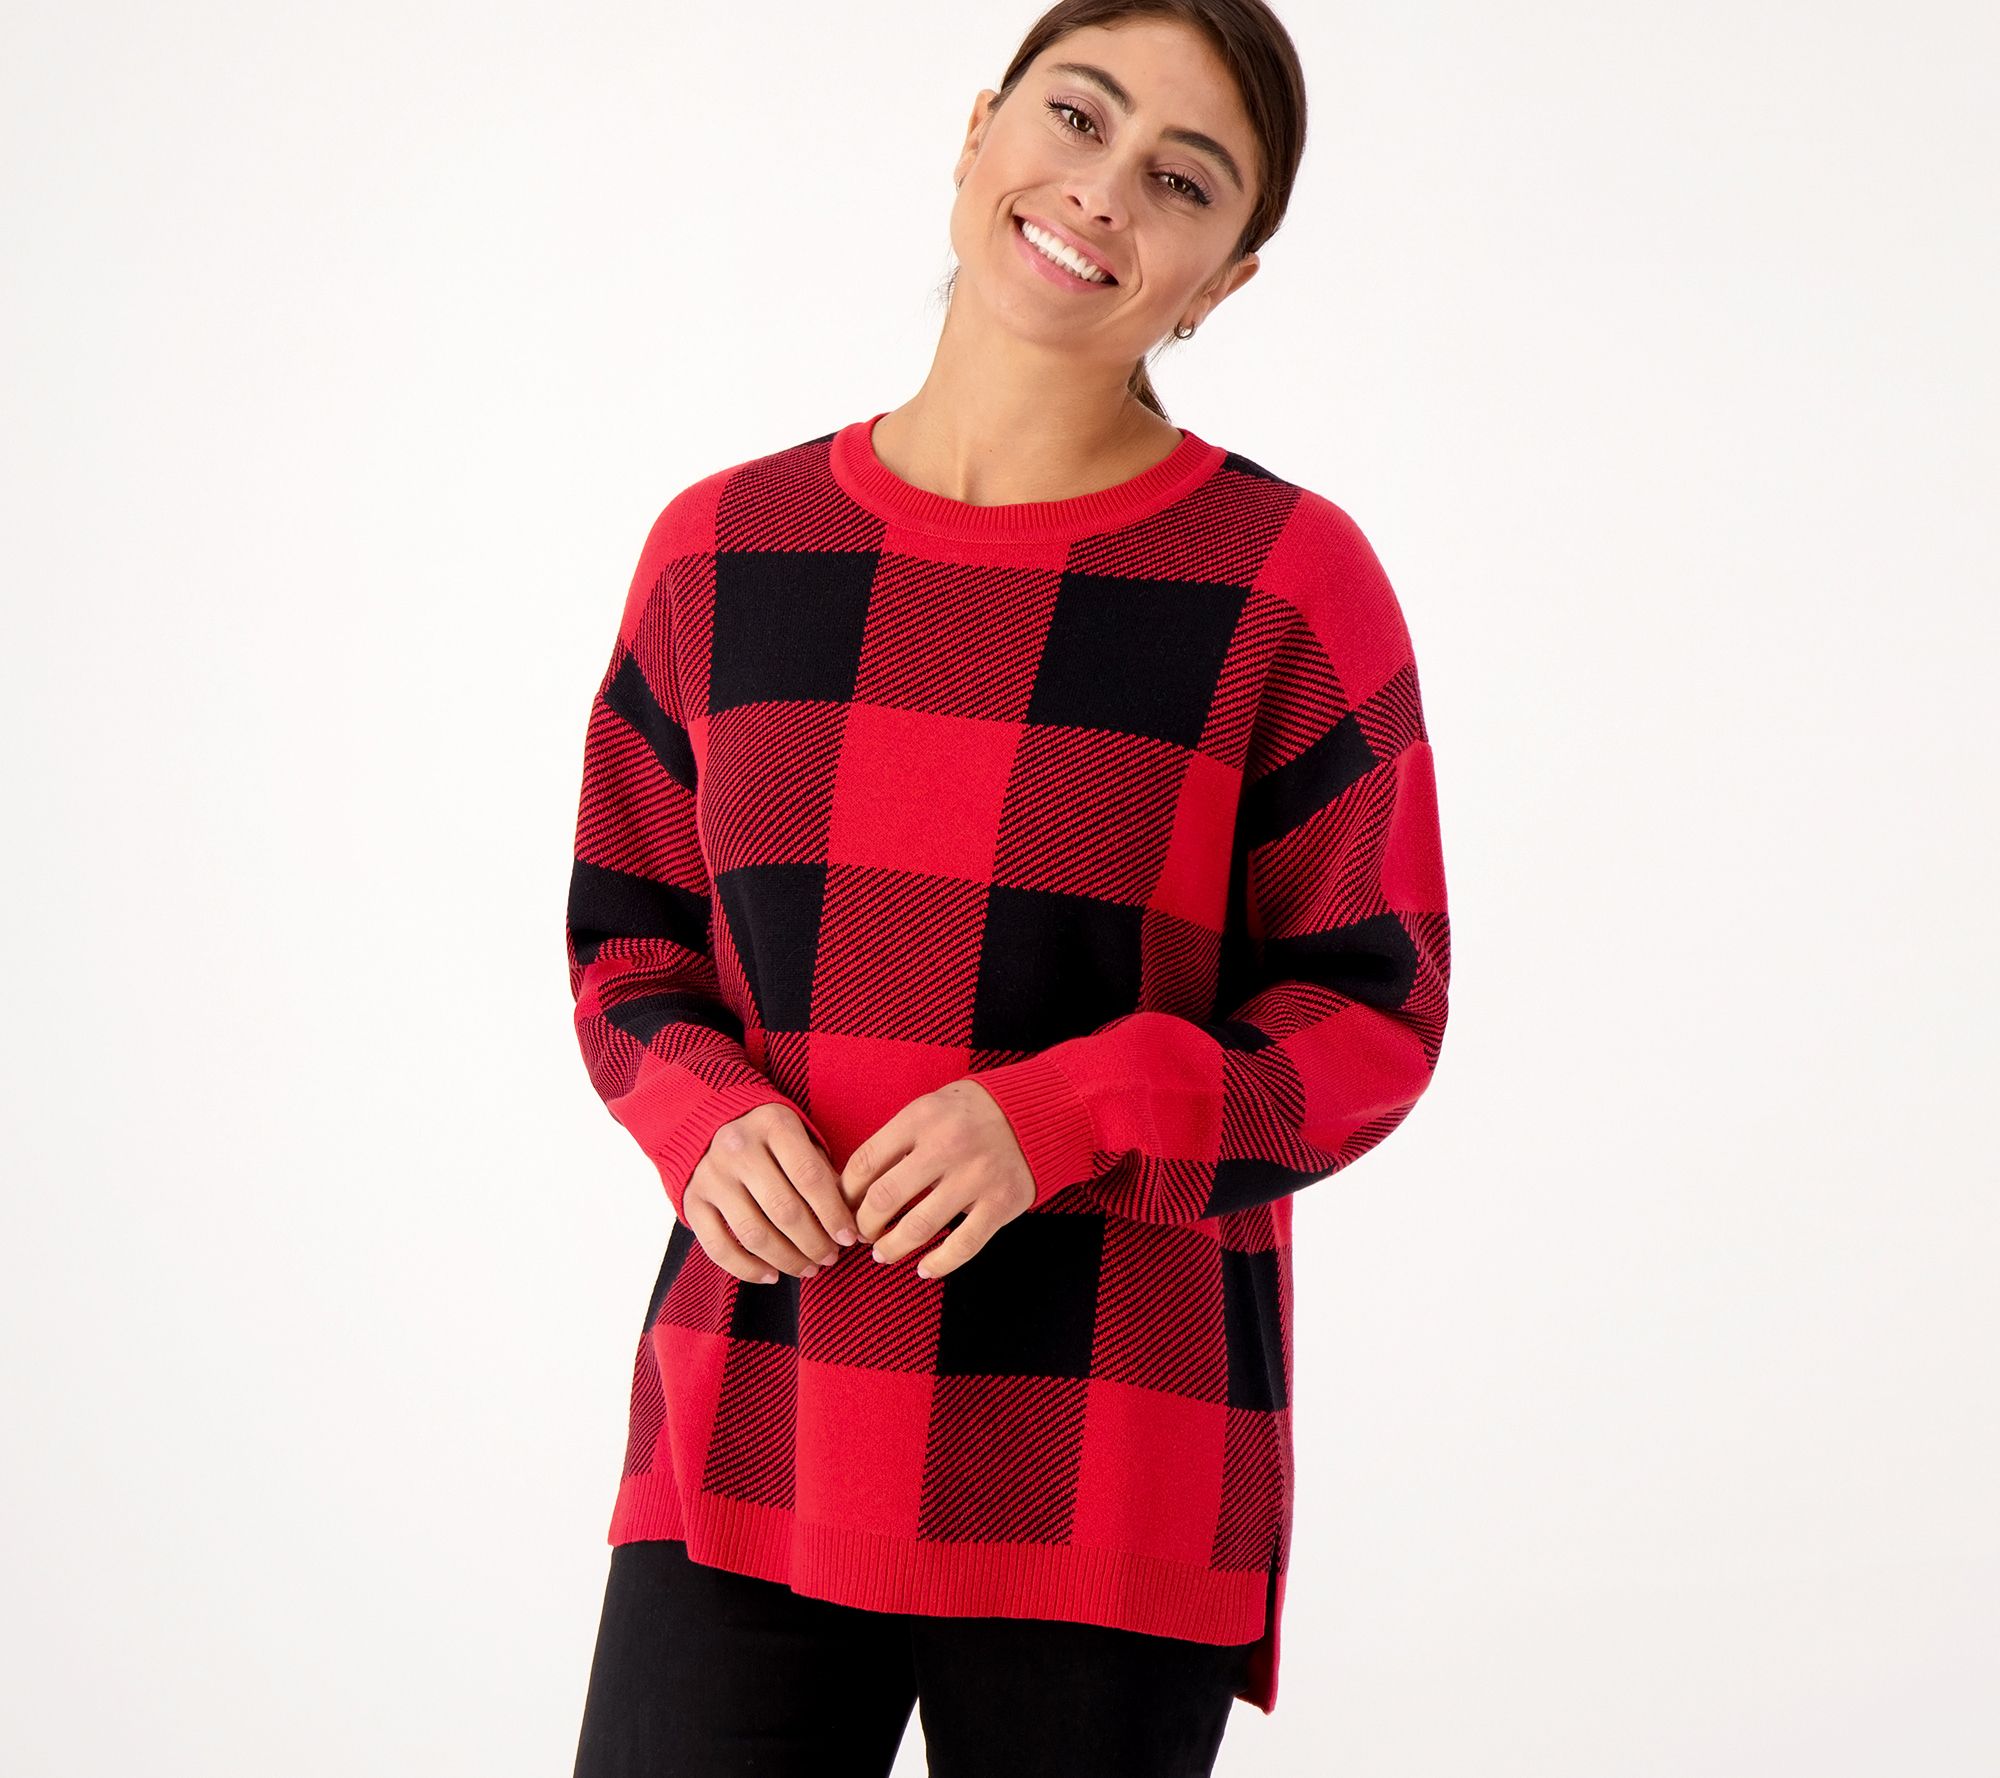 Denim & Co. Plaid Jacquard Pullover Sweater with Side Slits - QVC.com